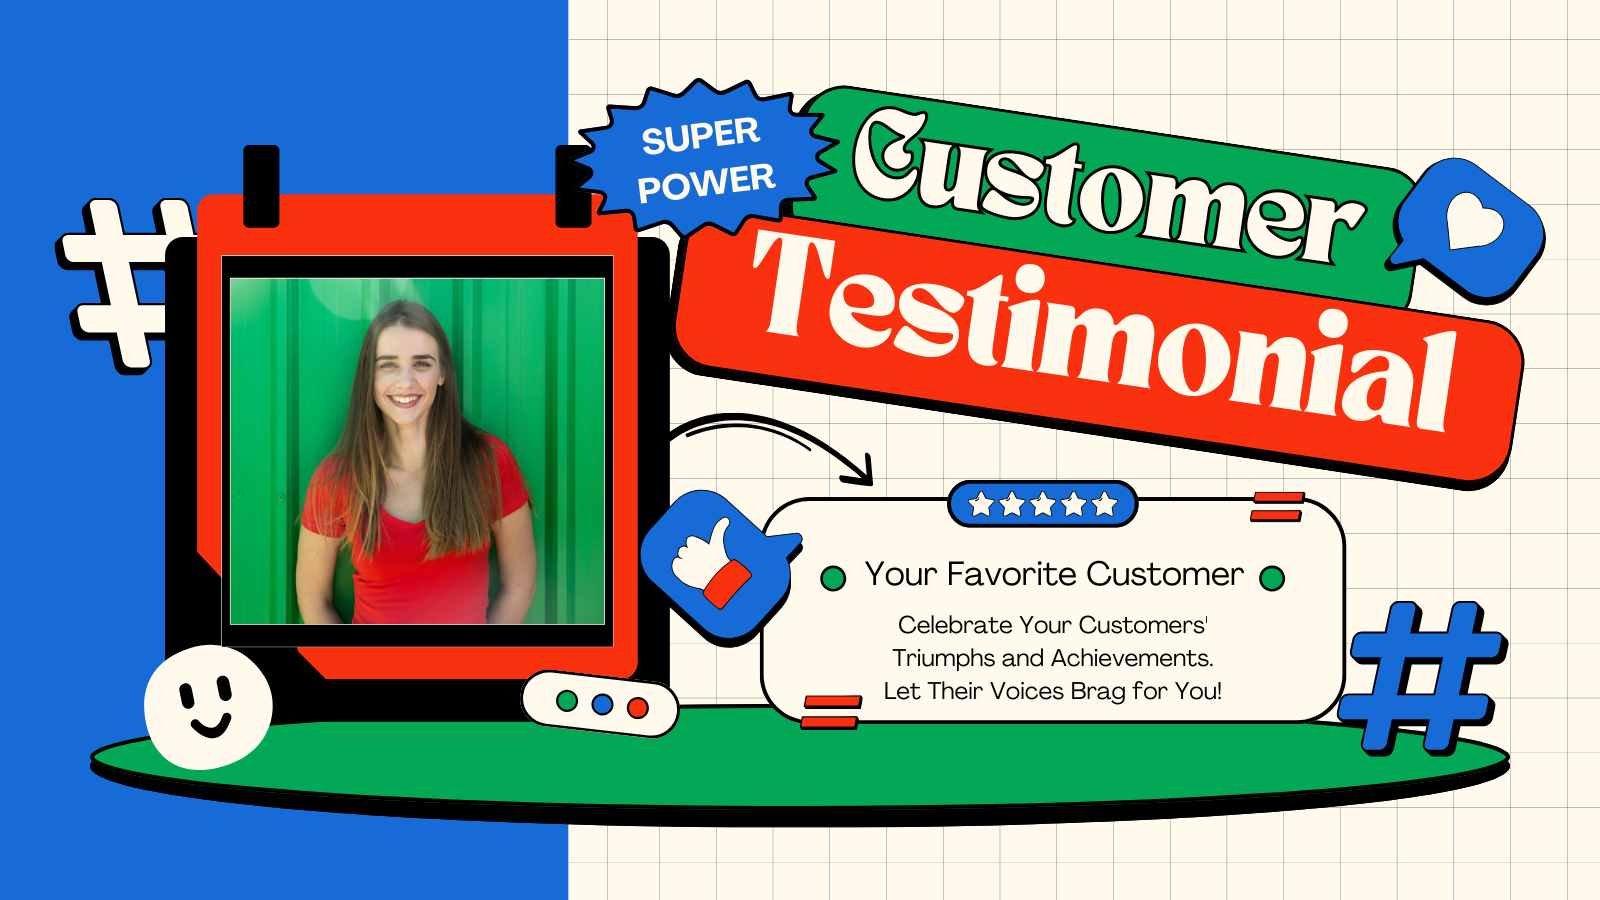 Unleash the power of testimonials! Discover hidden gems across your marketing strategy to supercharge sales and customer satisfaction with social proof.